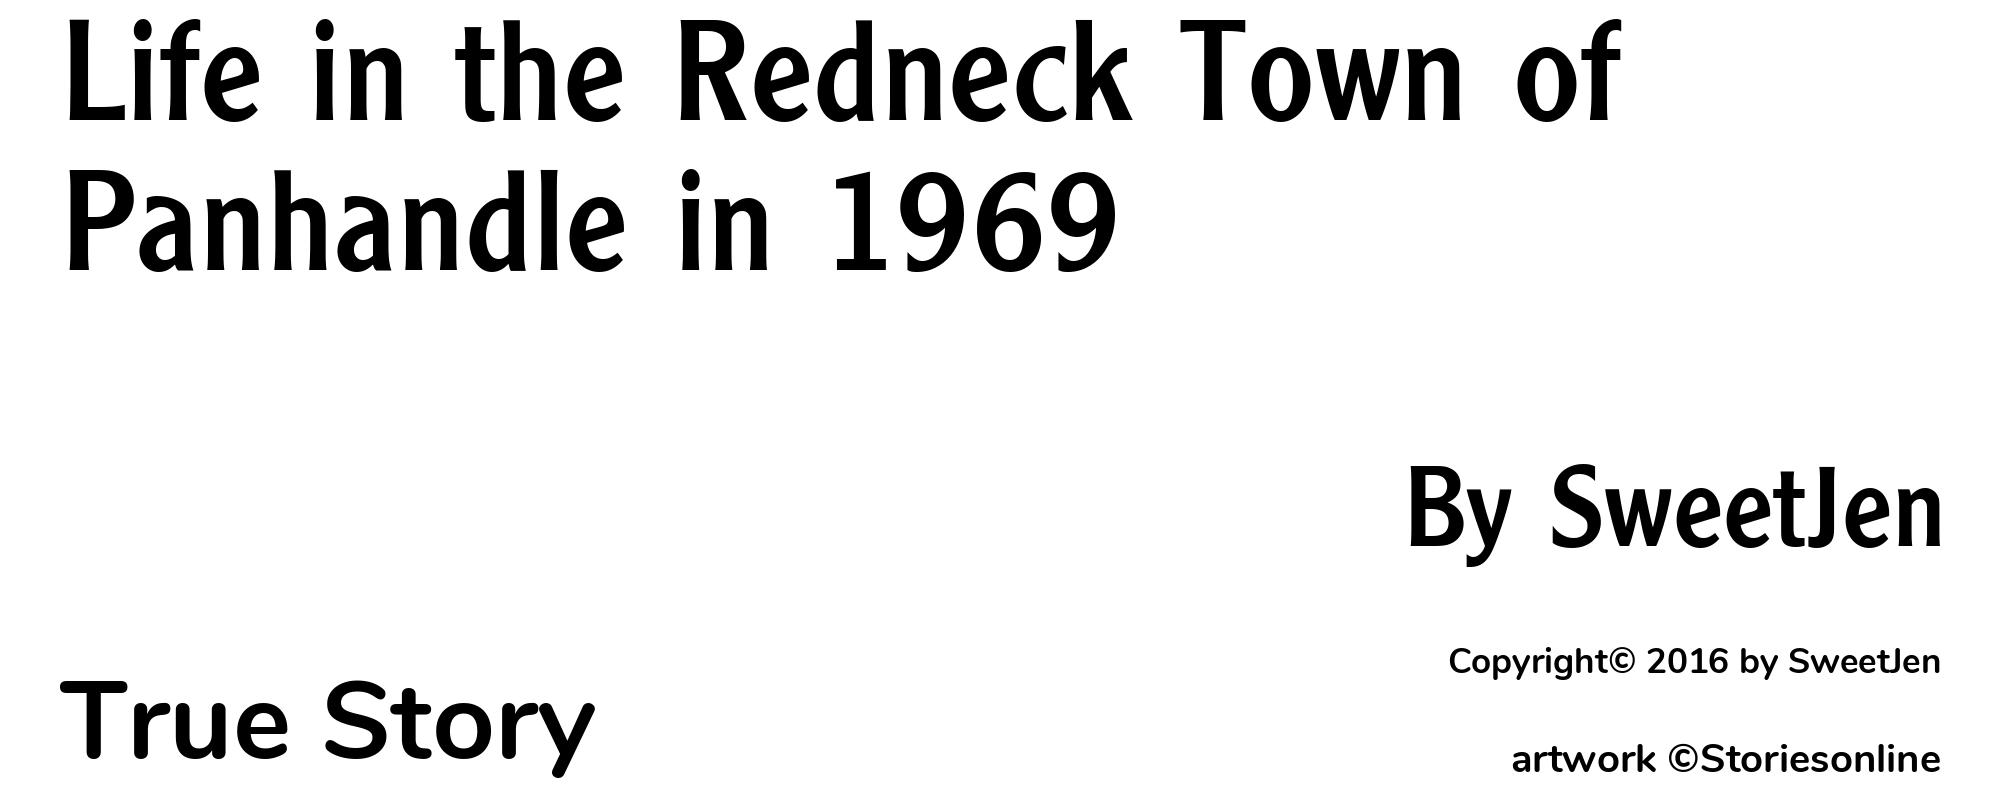 Life in the Redneck Town of Panhandle in 1969 - Cover